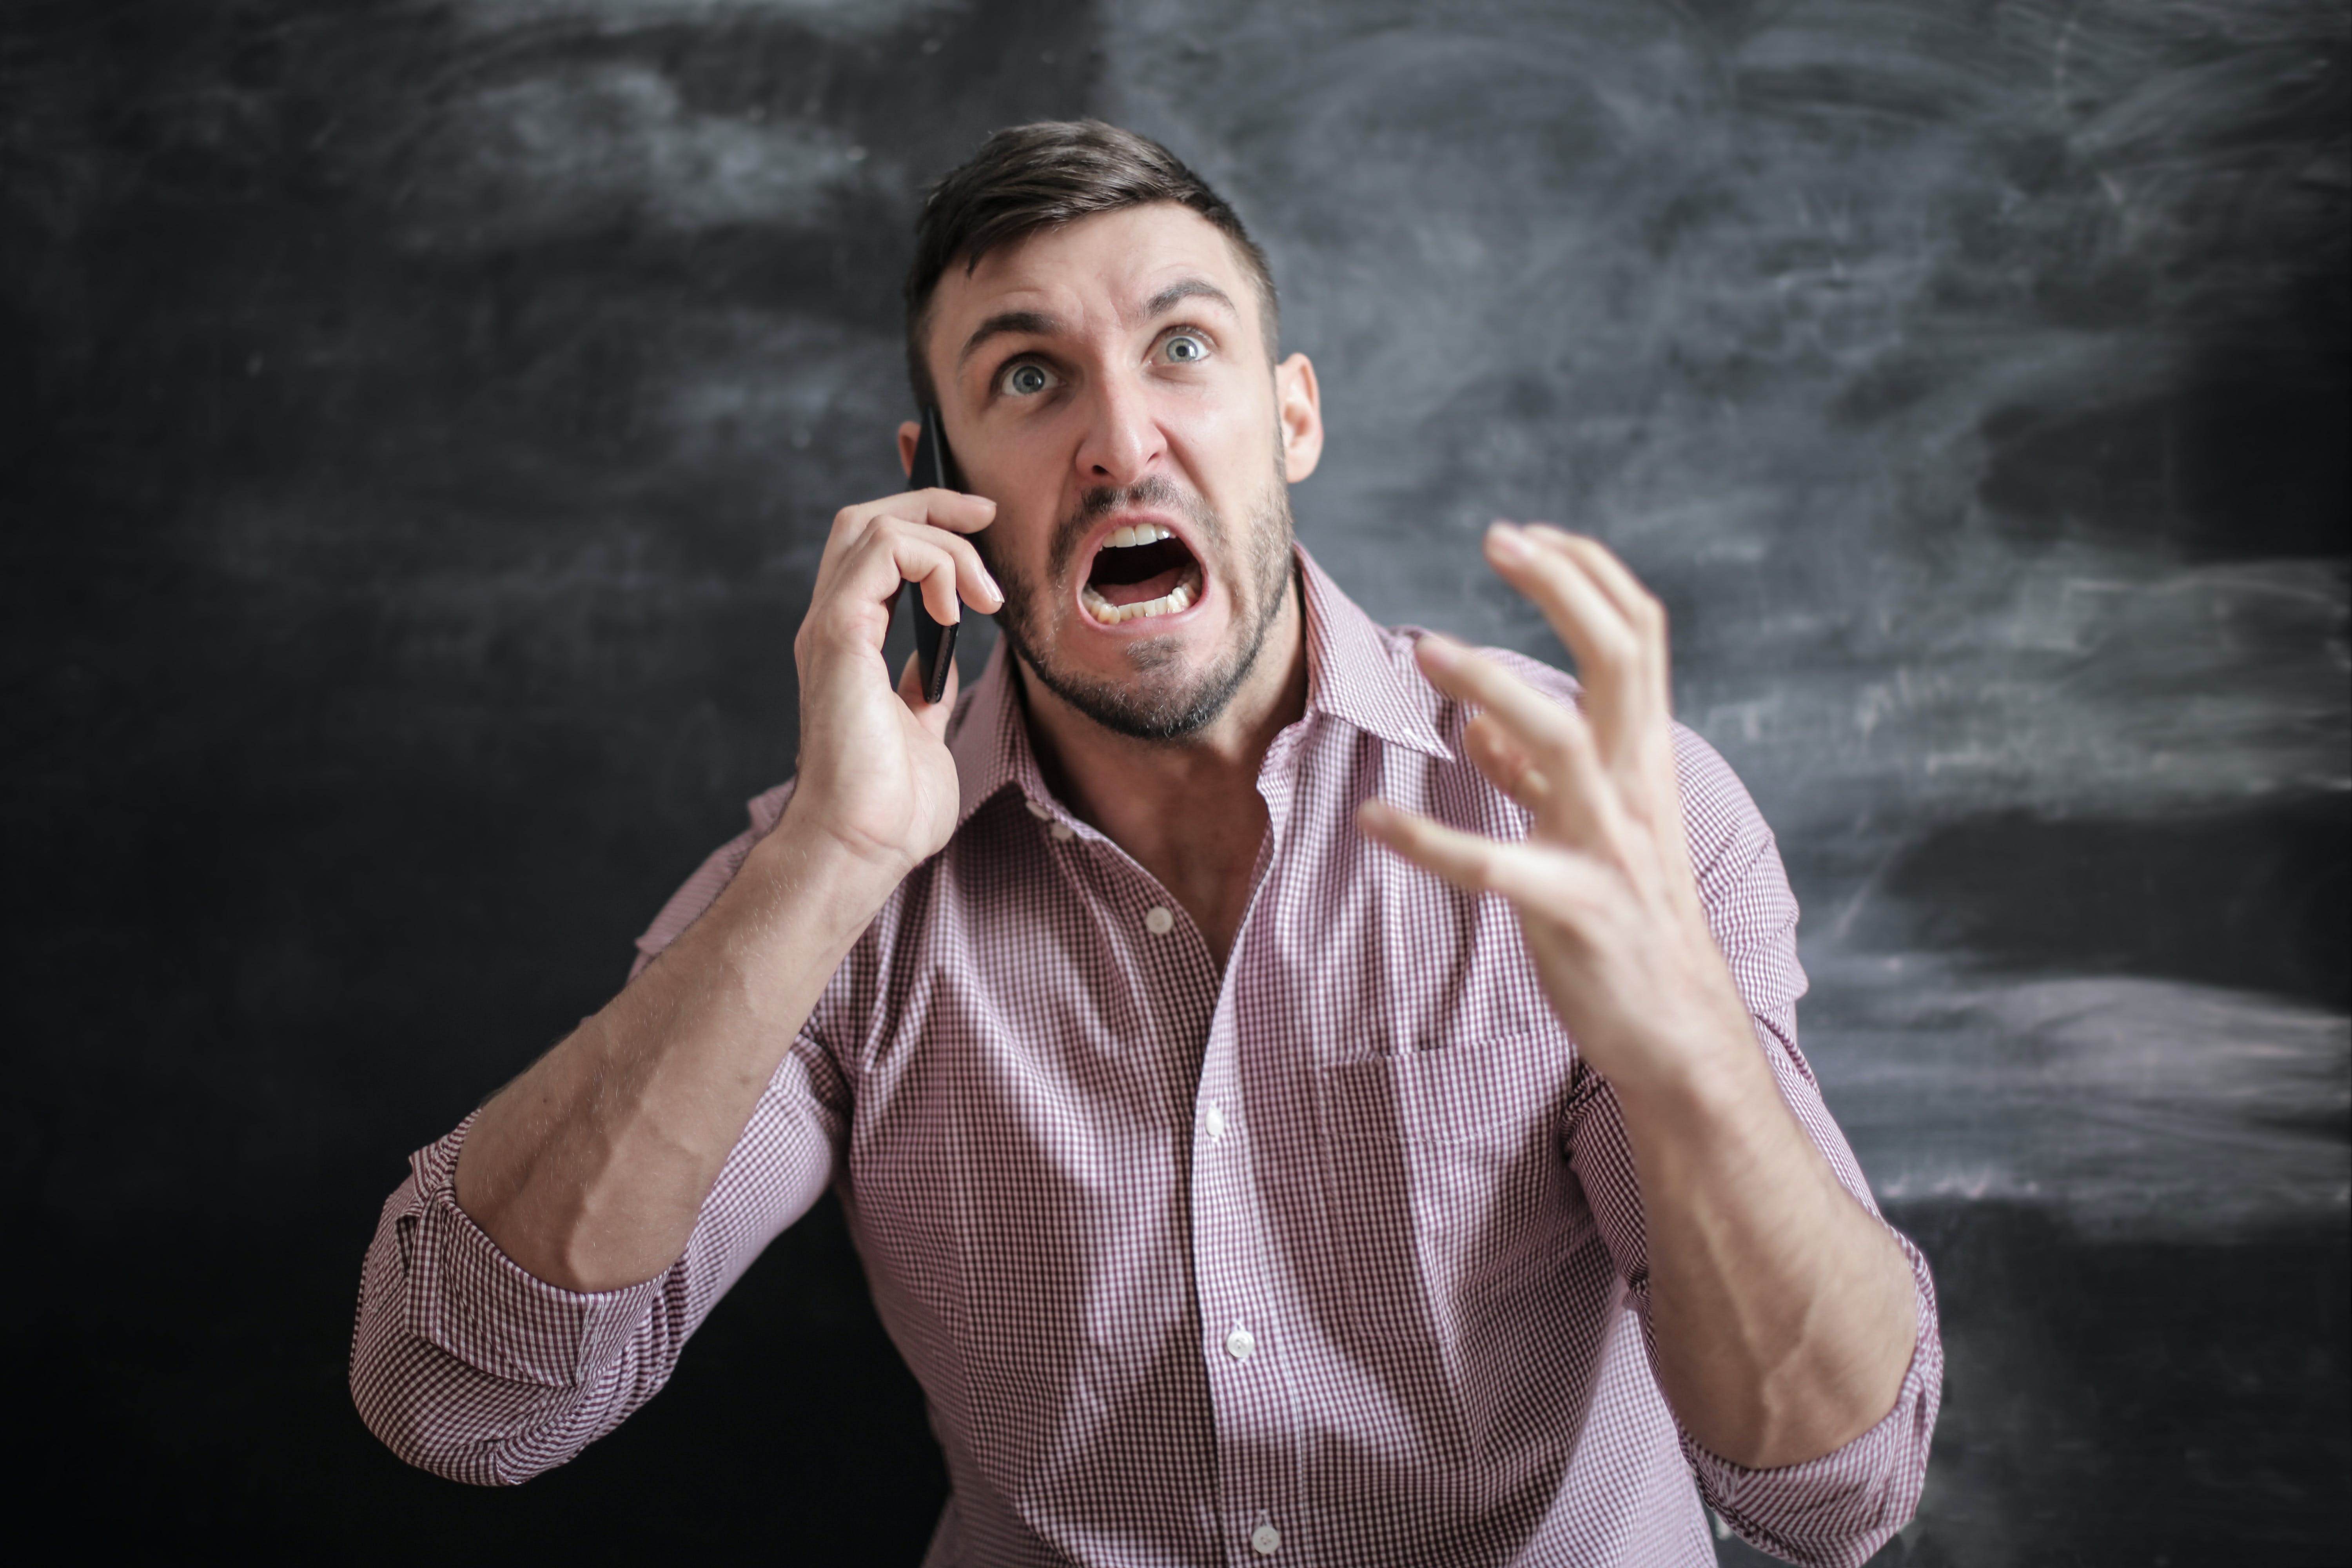 A man shouts while angrily gesturing during a phone call | Source: Pexels